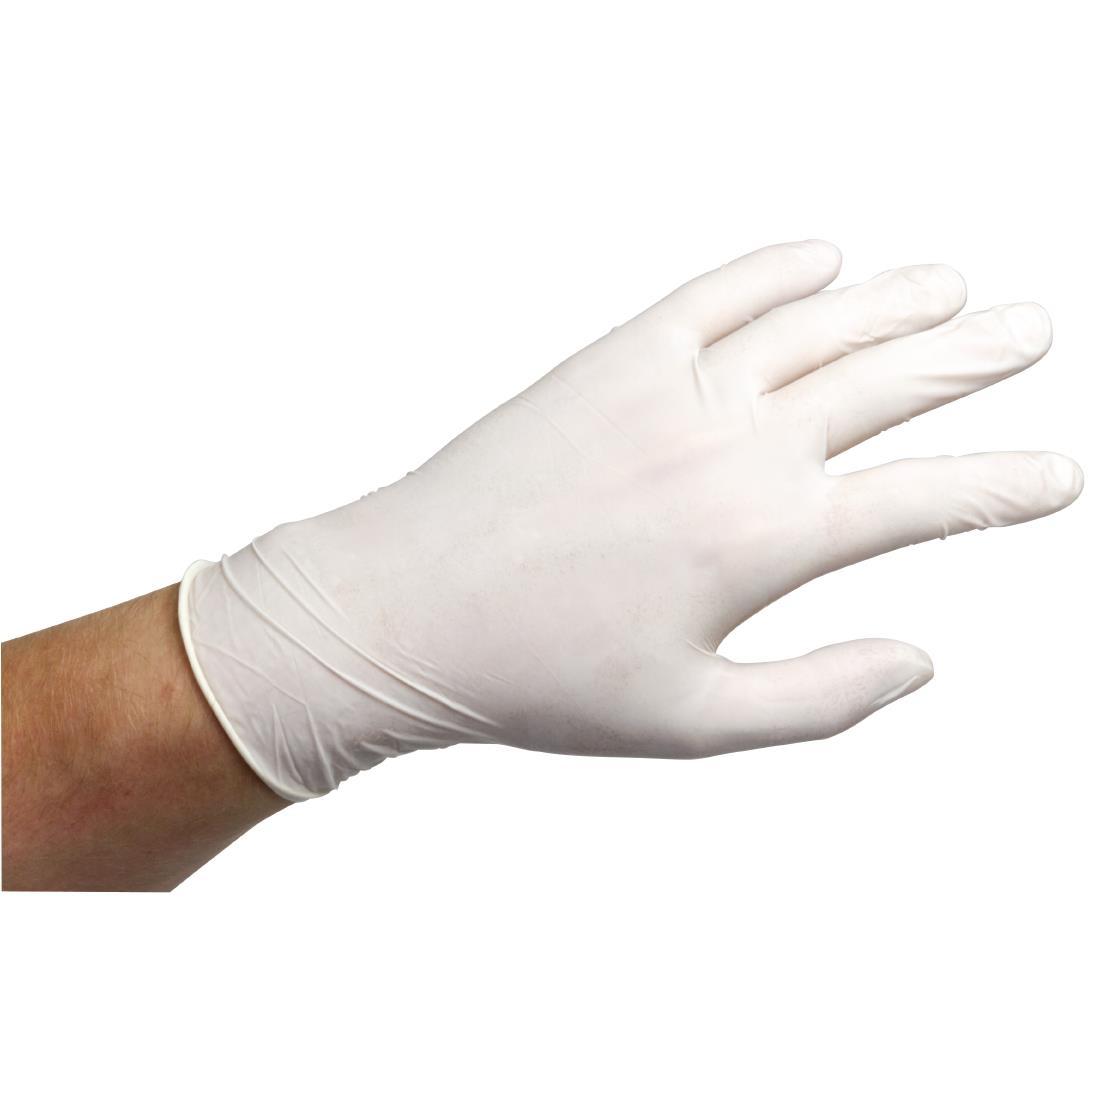 Powdered Latex Gloves Small (Pack of 100) - A228-S  - 2